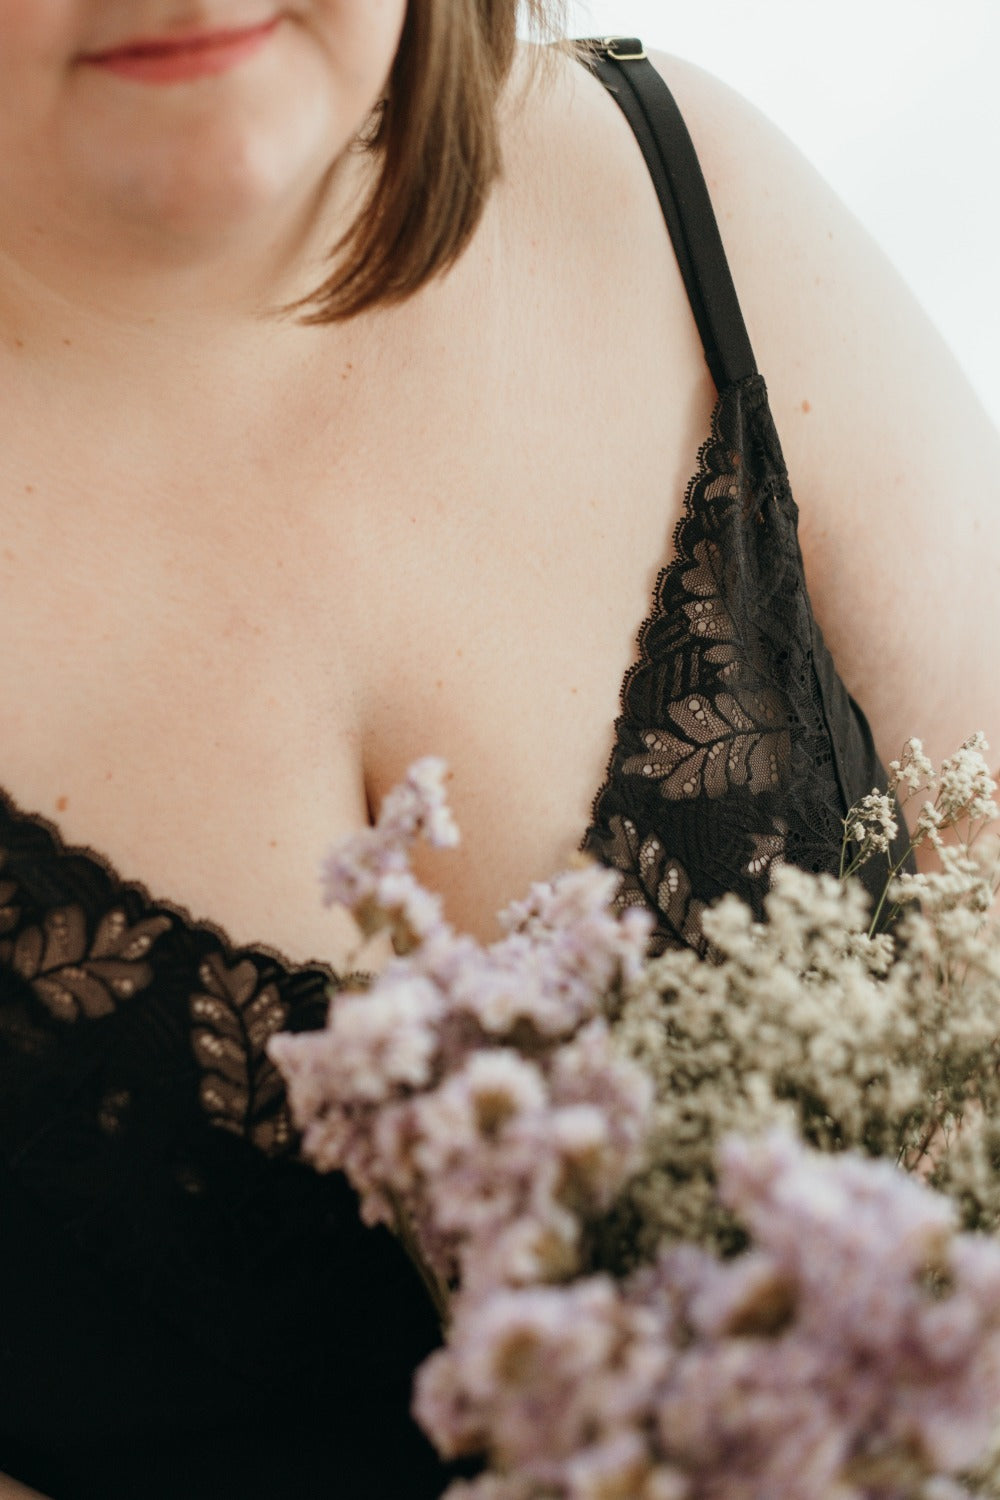 Woman holding flowers and wearing black lace underwear